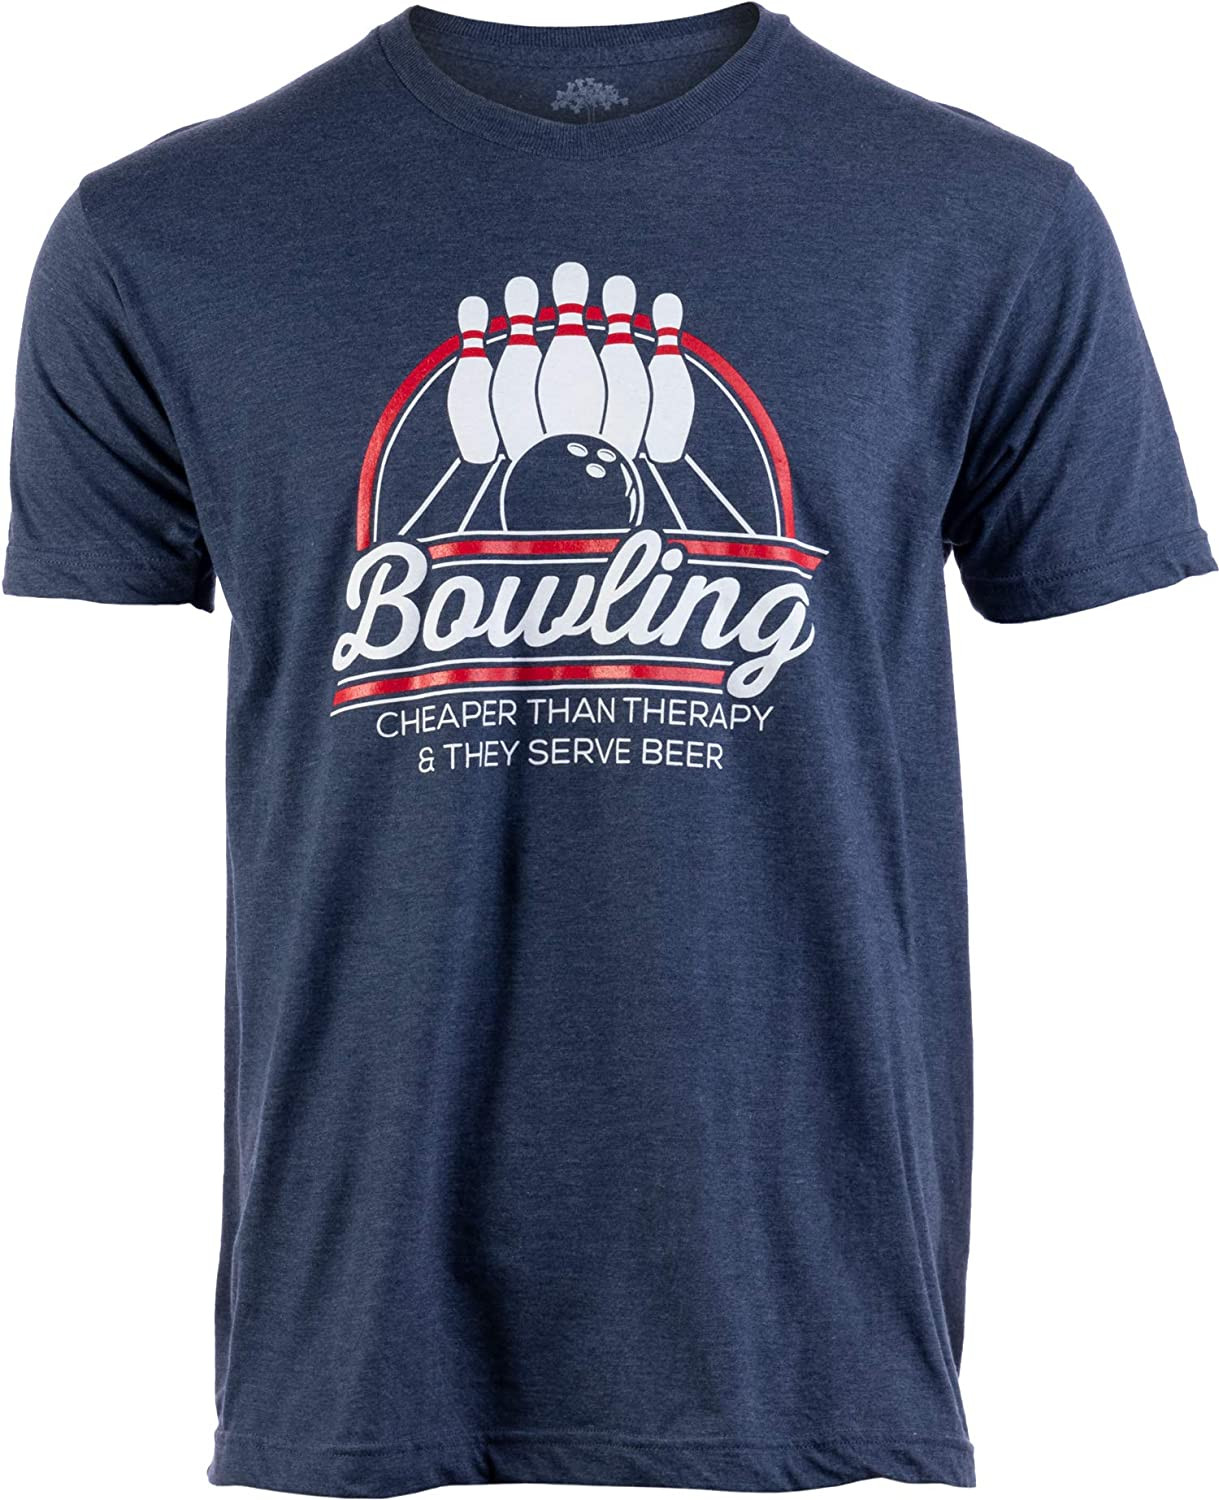 Bowling: Cheaper Than Therapy, & They Serve Beer T-Shirt